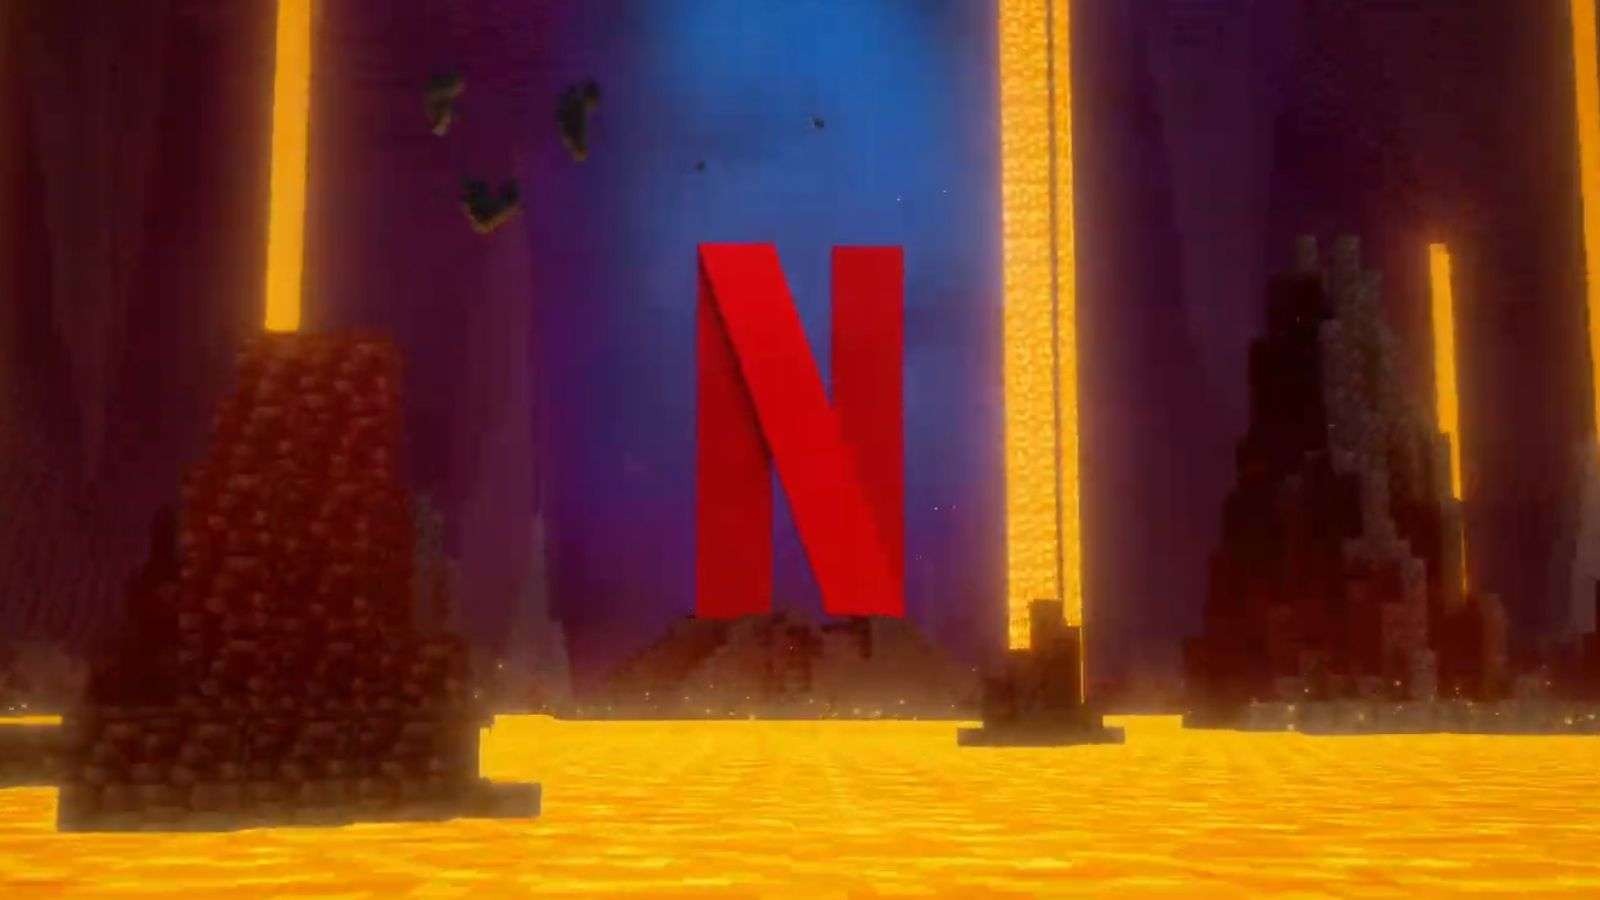 Minecraft animated series coming from Netflix